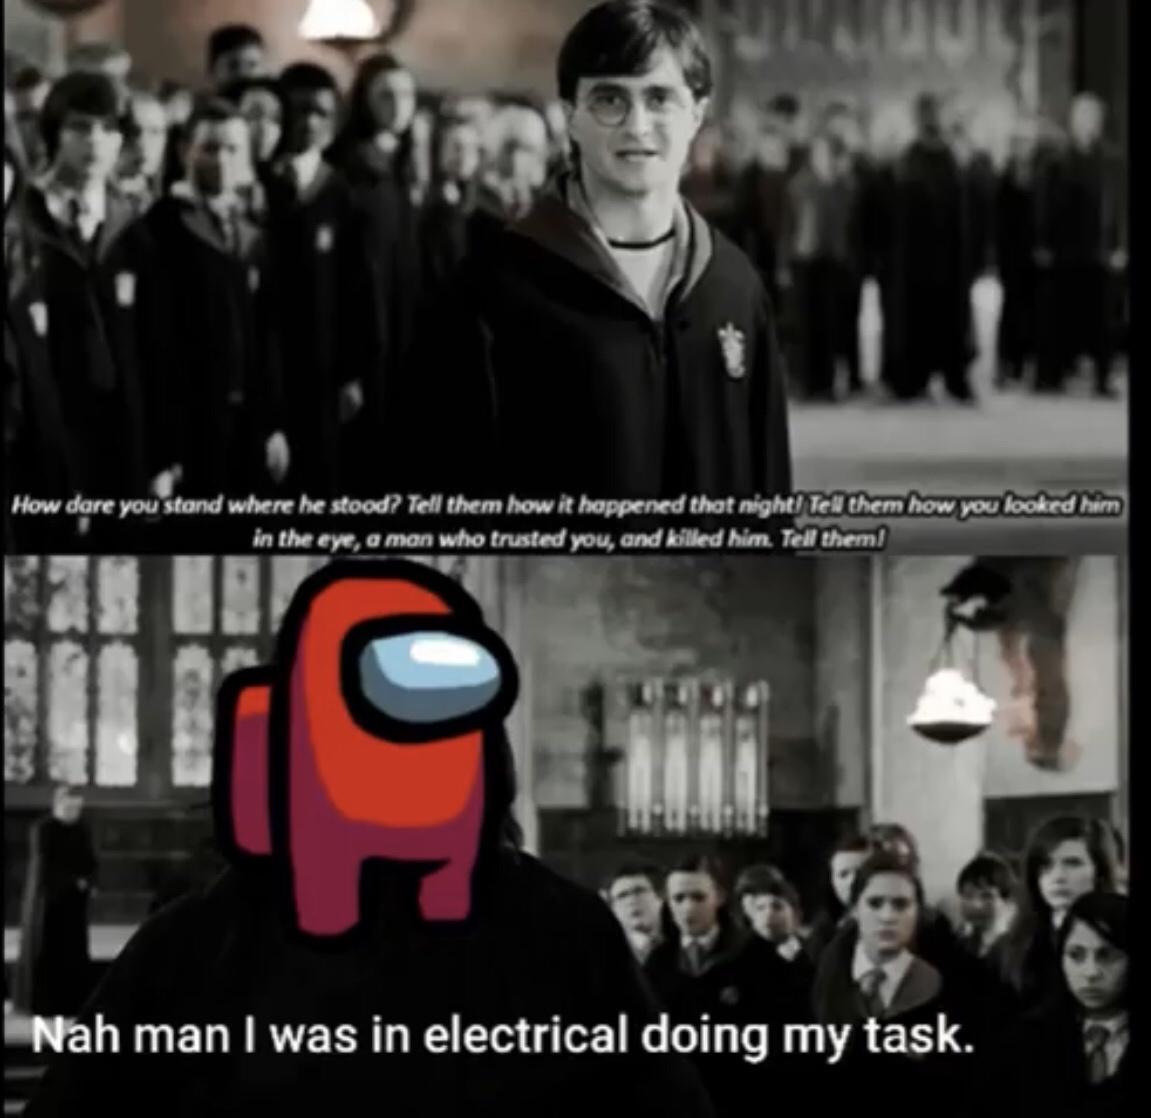 harry potter thursday meme - How dare you stand where he stood? Tell them how it happened that night! Tell them how you looked him in the eye, a man who trusted you, and killed him. Tell them! Nah man I was in electrical doing my task.